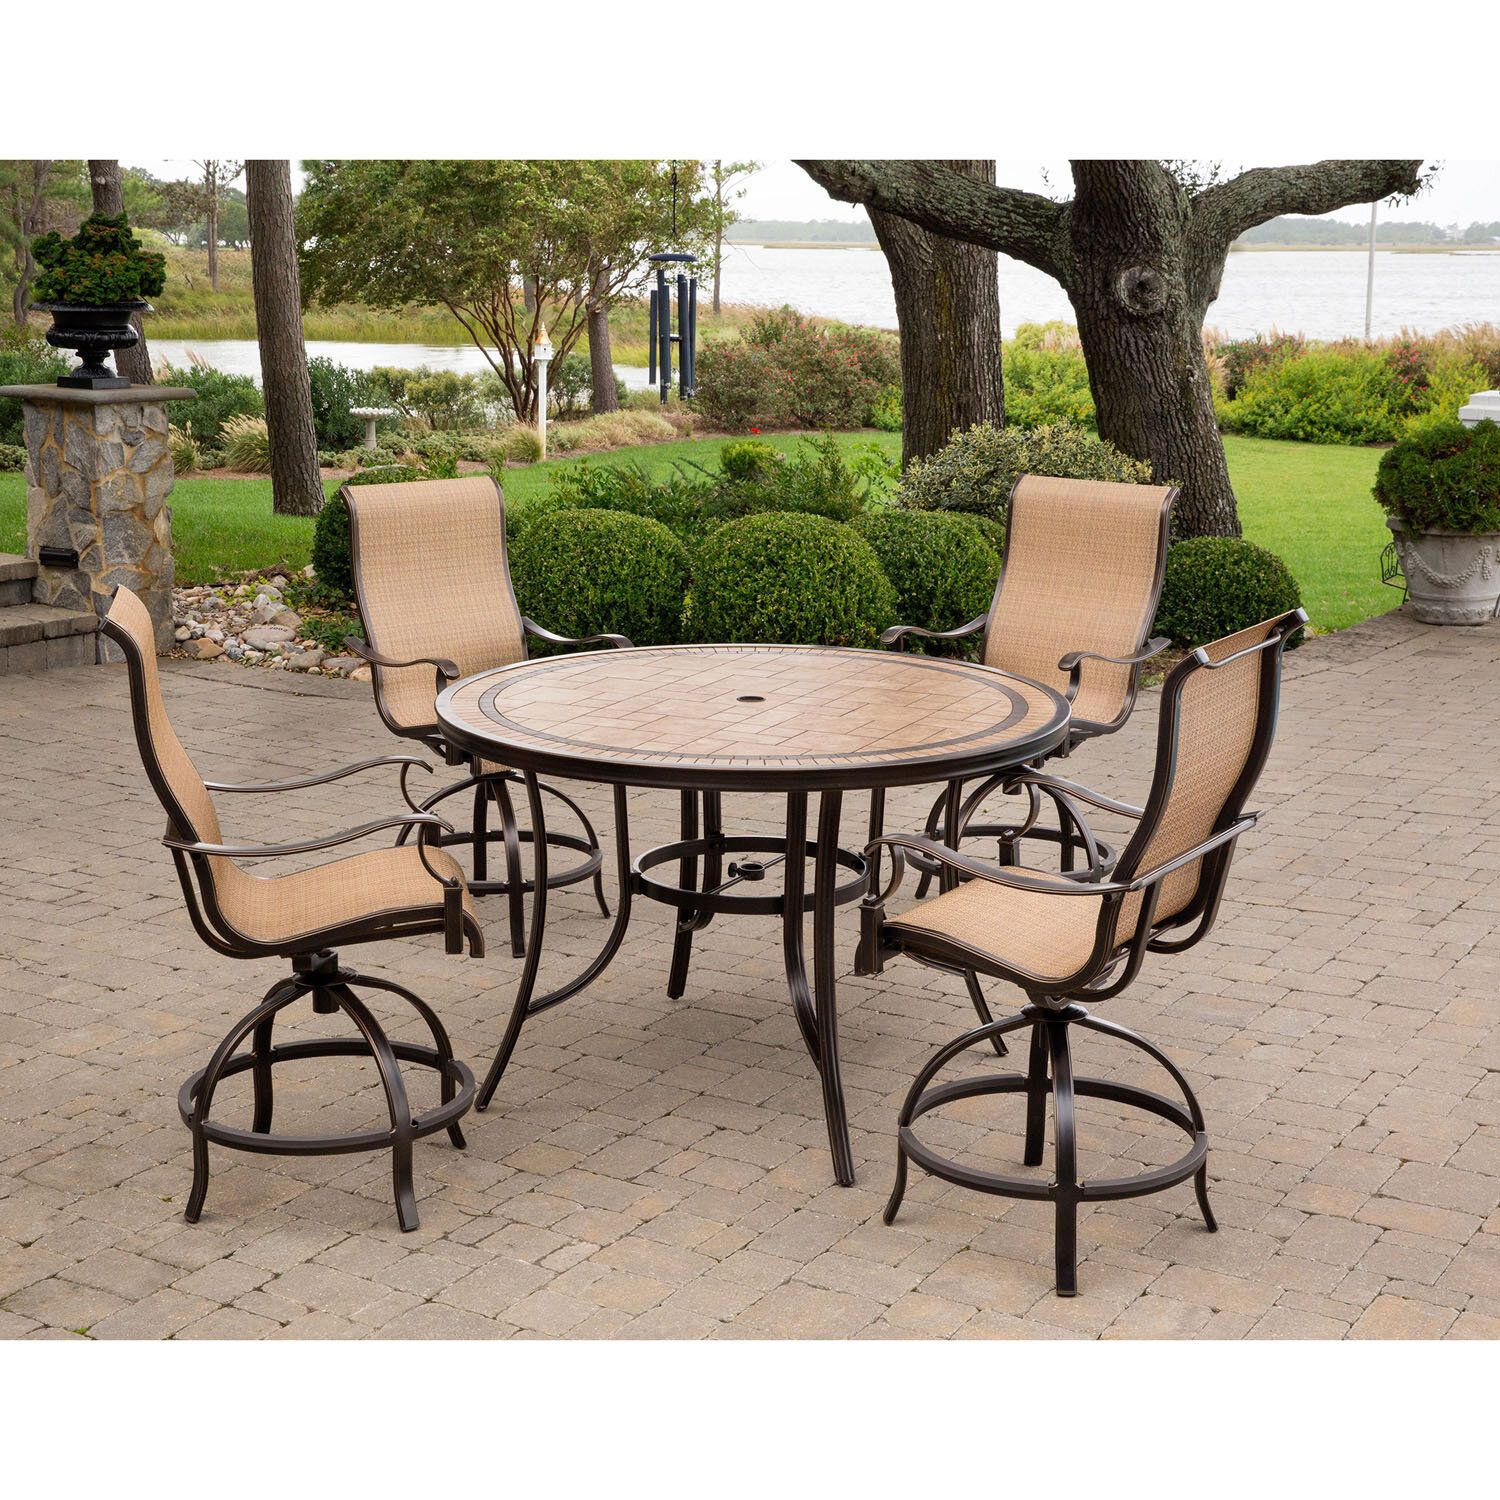 Outdoor High Dining Set | Ricetta Ed Ingredienti Dei Foodblogger Italiani In Beige Wicker And Green Fabric Patio Bistro Sets (View 10 of 15)